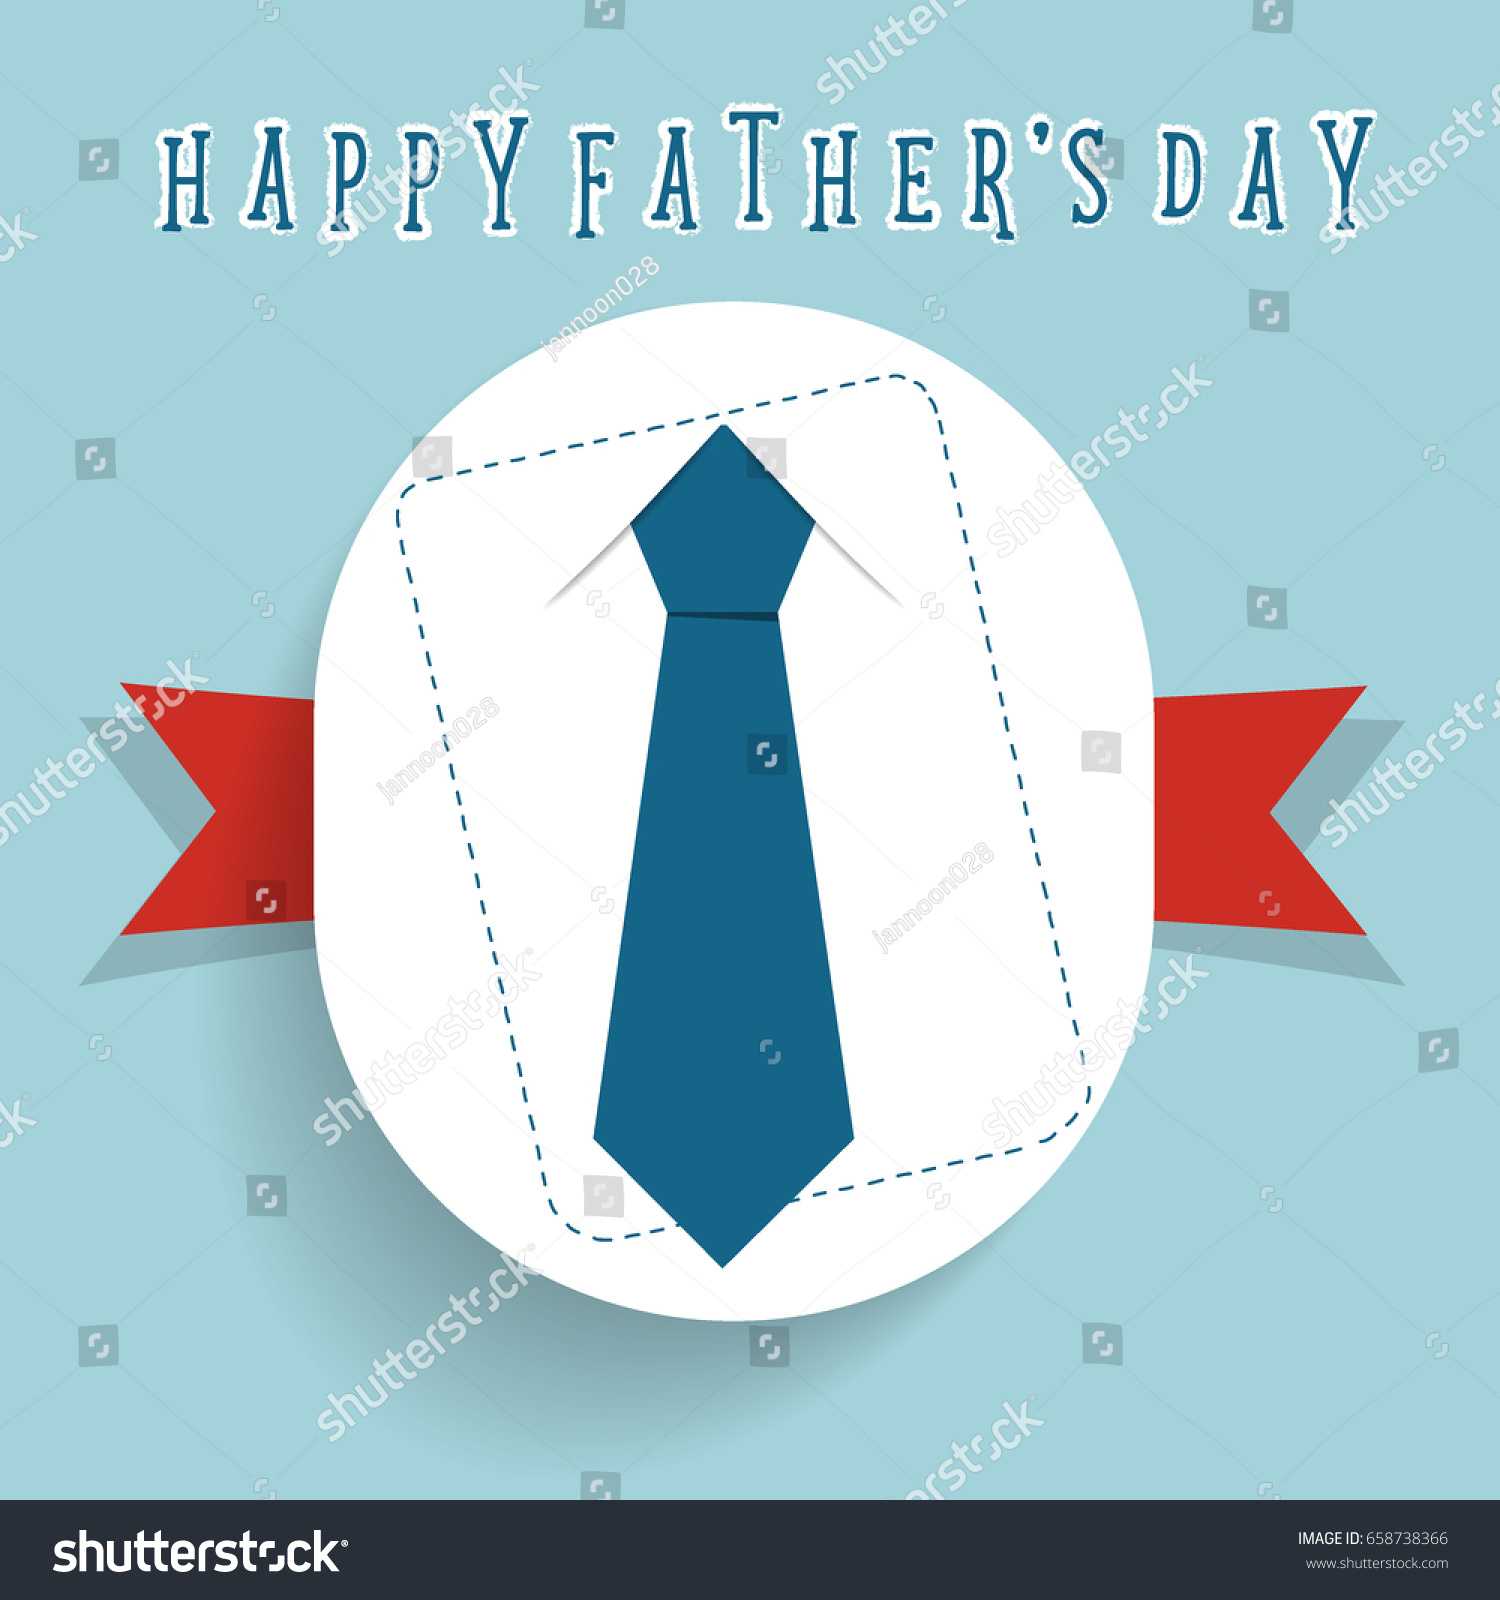 Happy Fathers Day Card Design Big Stock Vector (Royalty Free Regarding Fathers Day Card Template